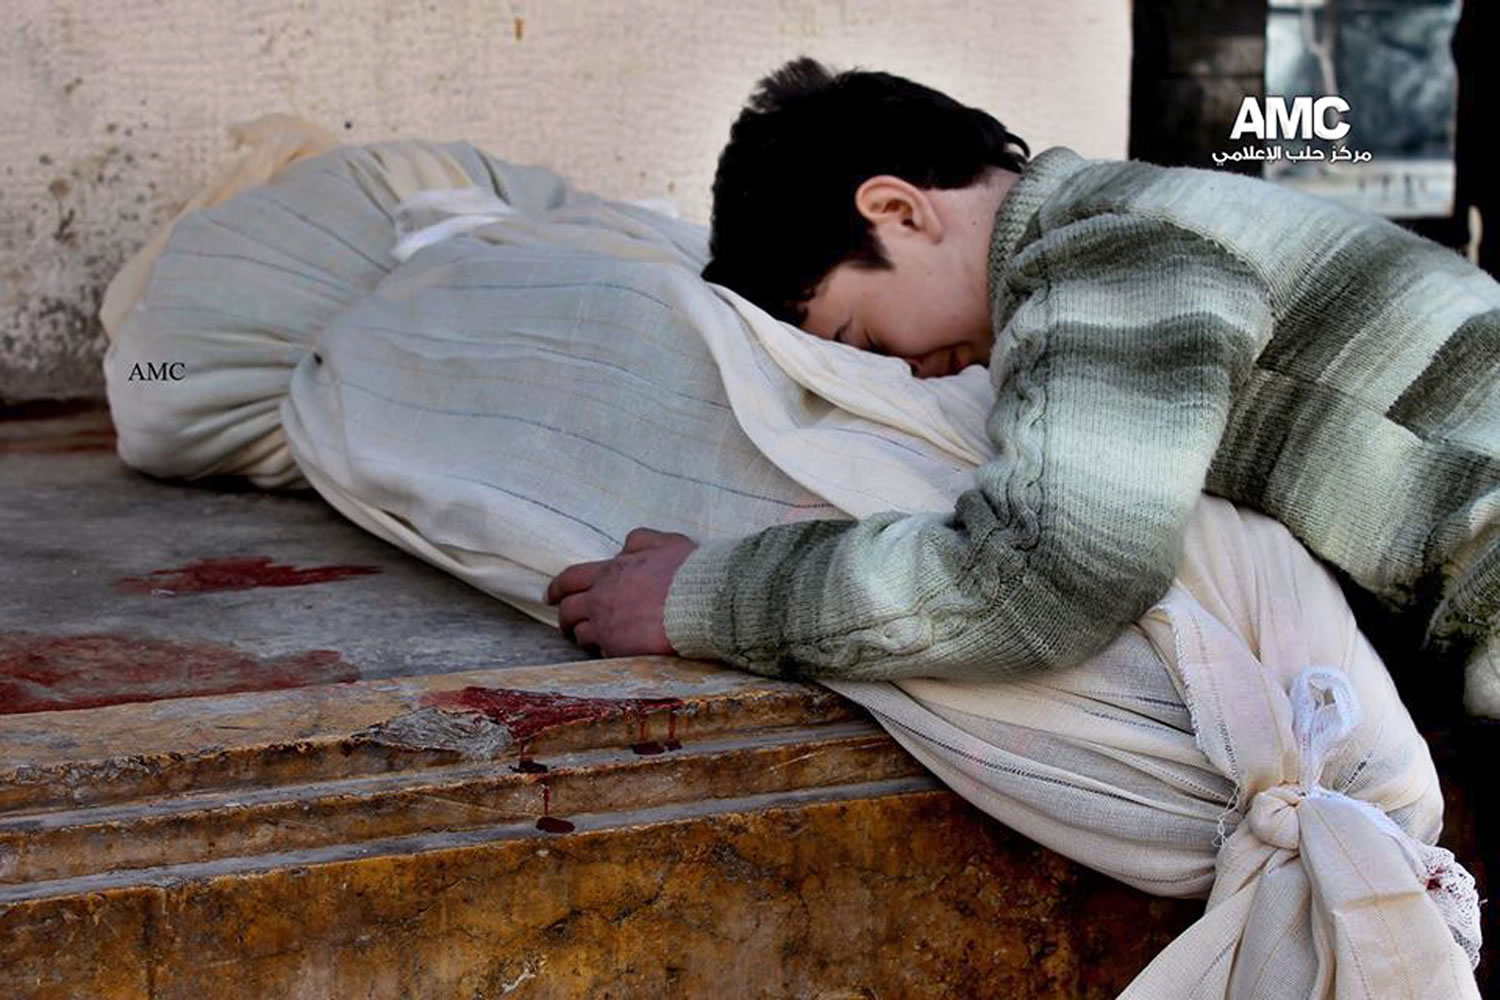 Aleppo Media Center
In this citizen journalism image, a Syrian boy weeps over the shrouded body of his mother after a Syrian government airstrike Friday in Aleppo, Syria.